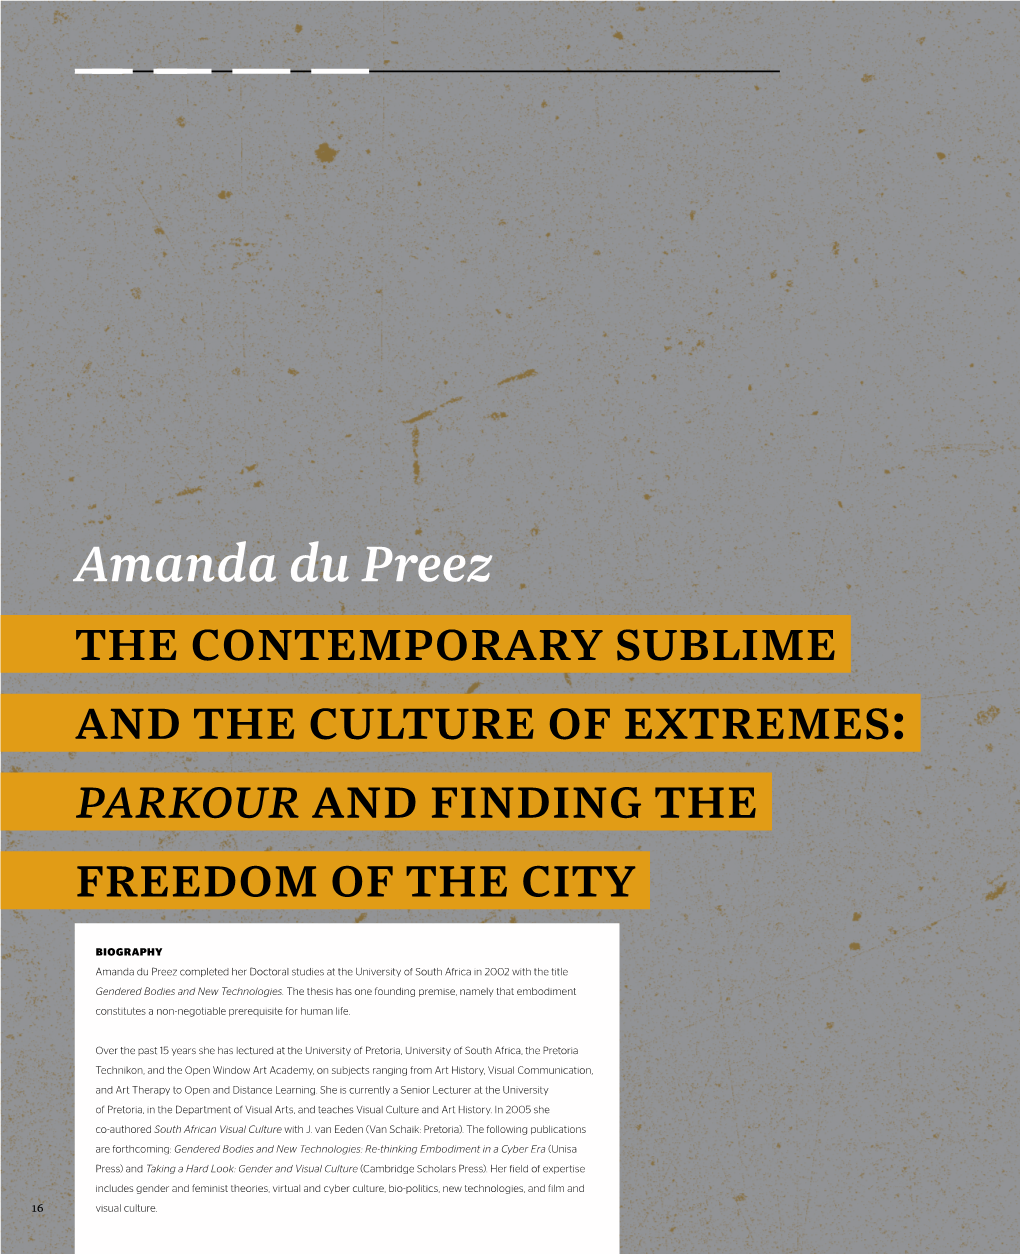 The Contemporary Sublime and the Culture of Extremes: Parkour and Finding the Freedom of the City